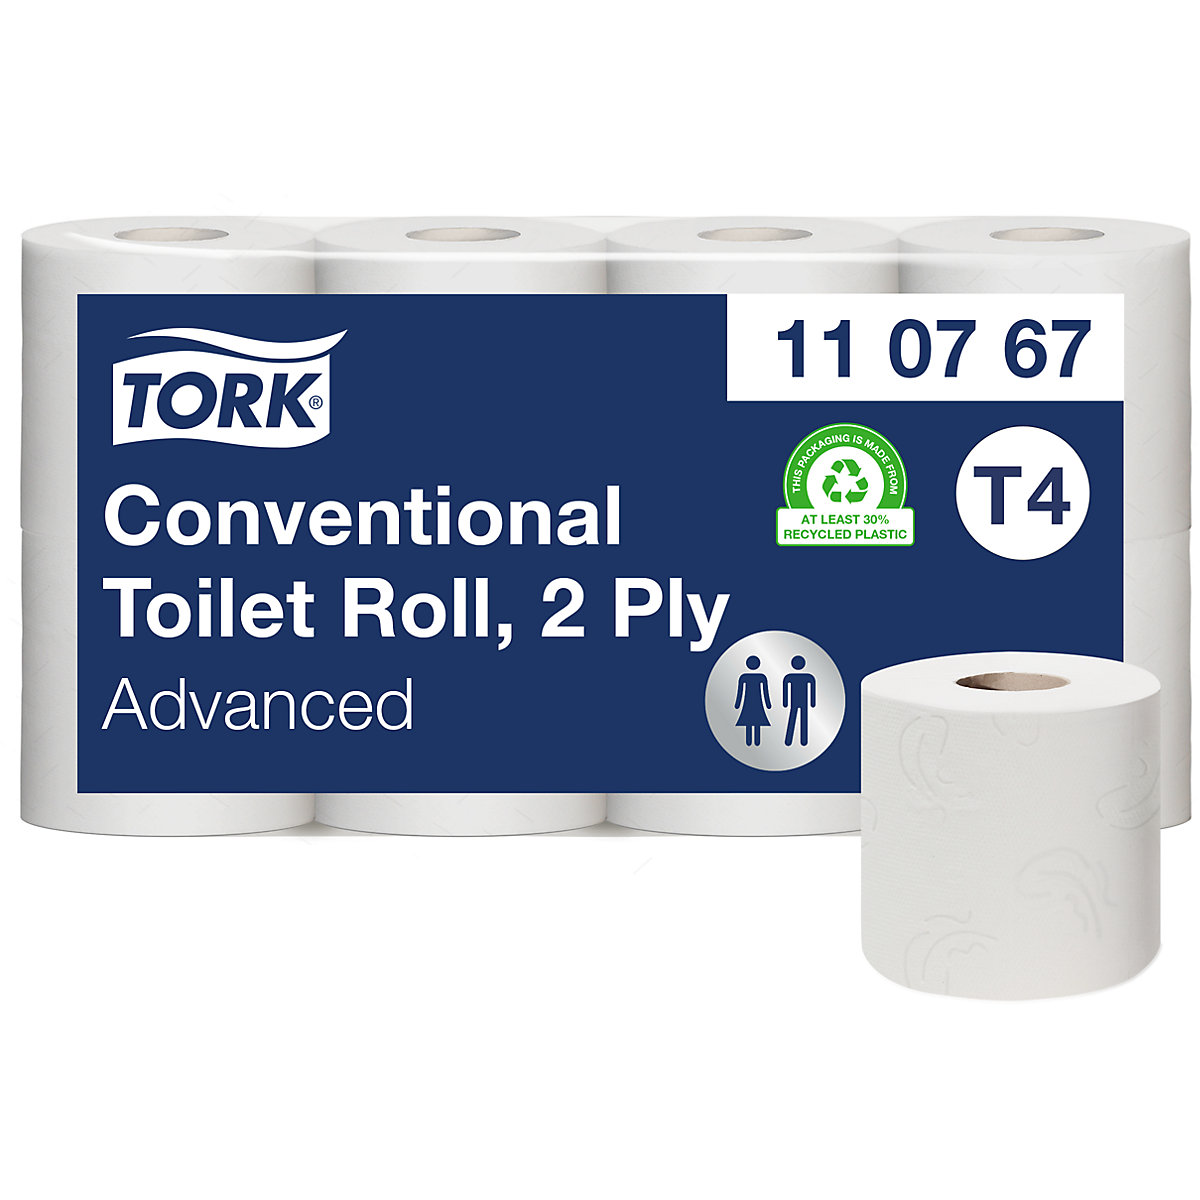 Small rolls of toilet paper, household roll – TORK